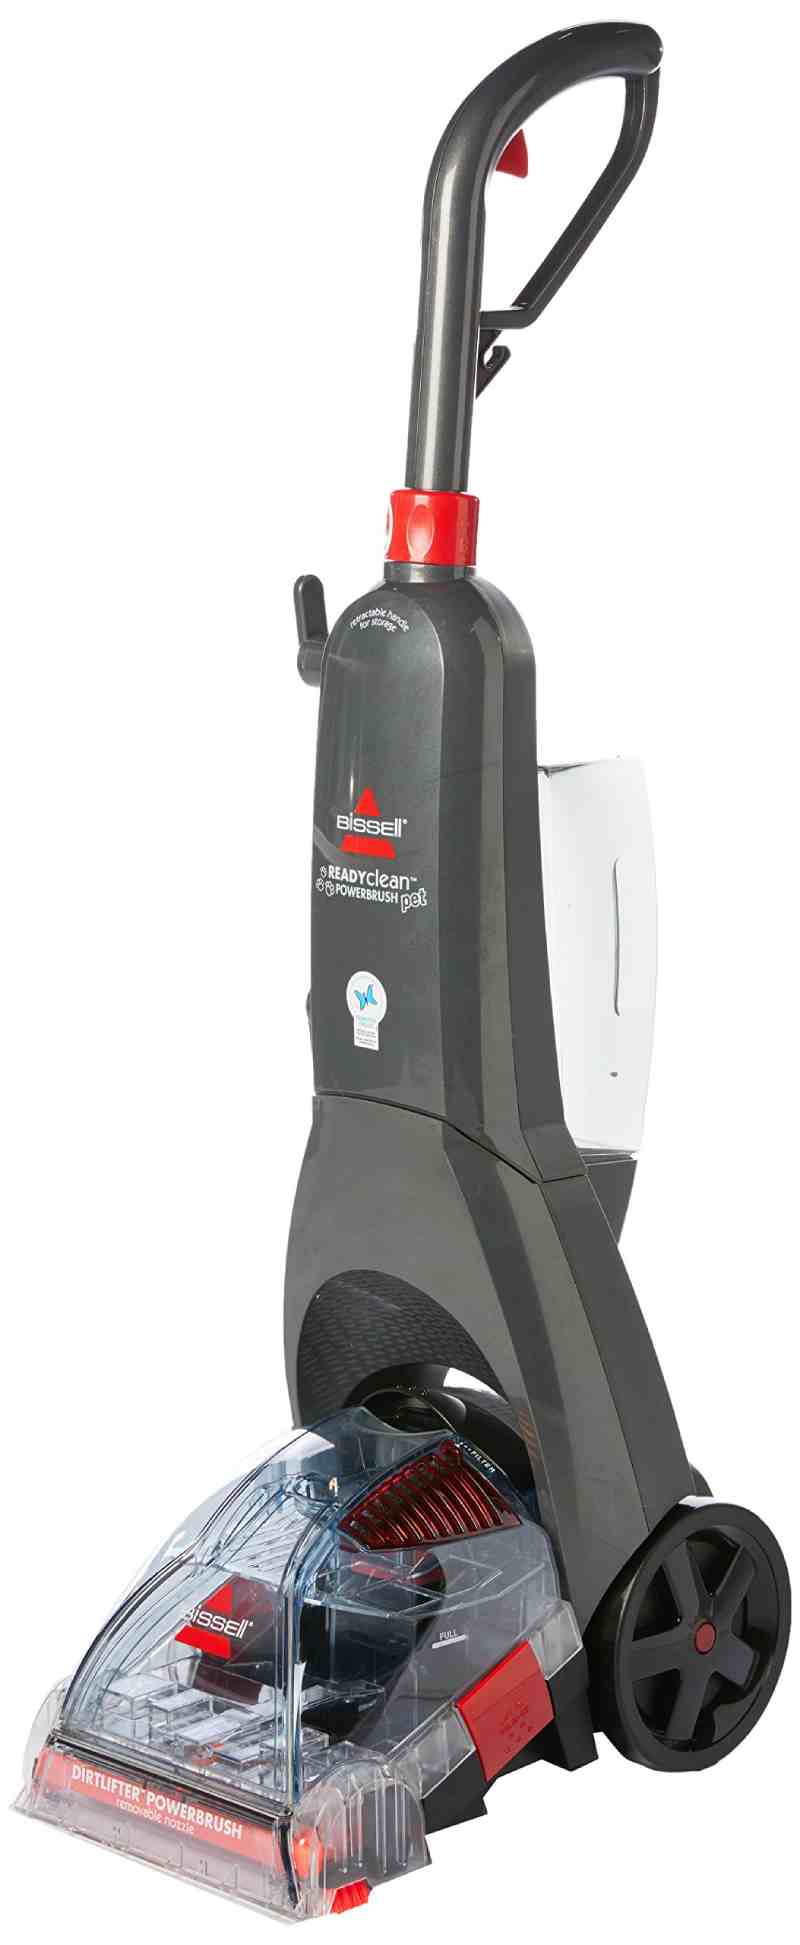  Bissell 20W7F ReadyClean Powerbrush